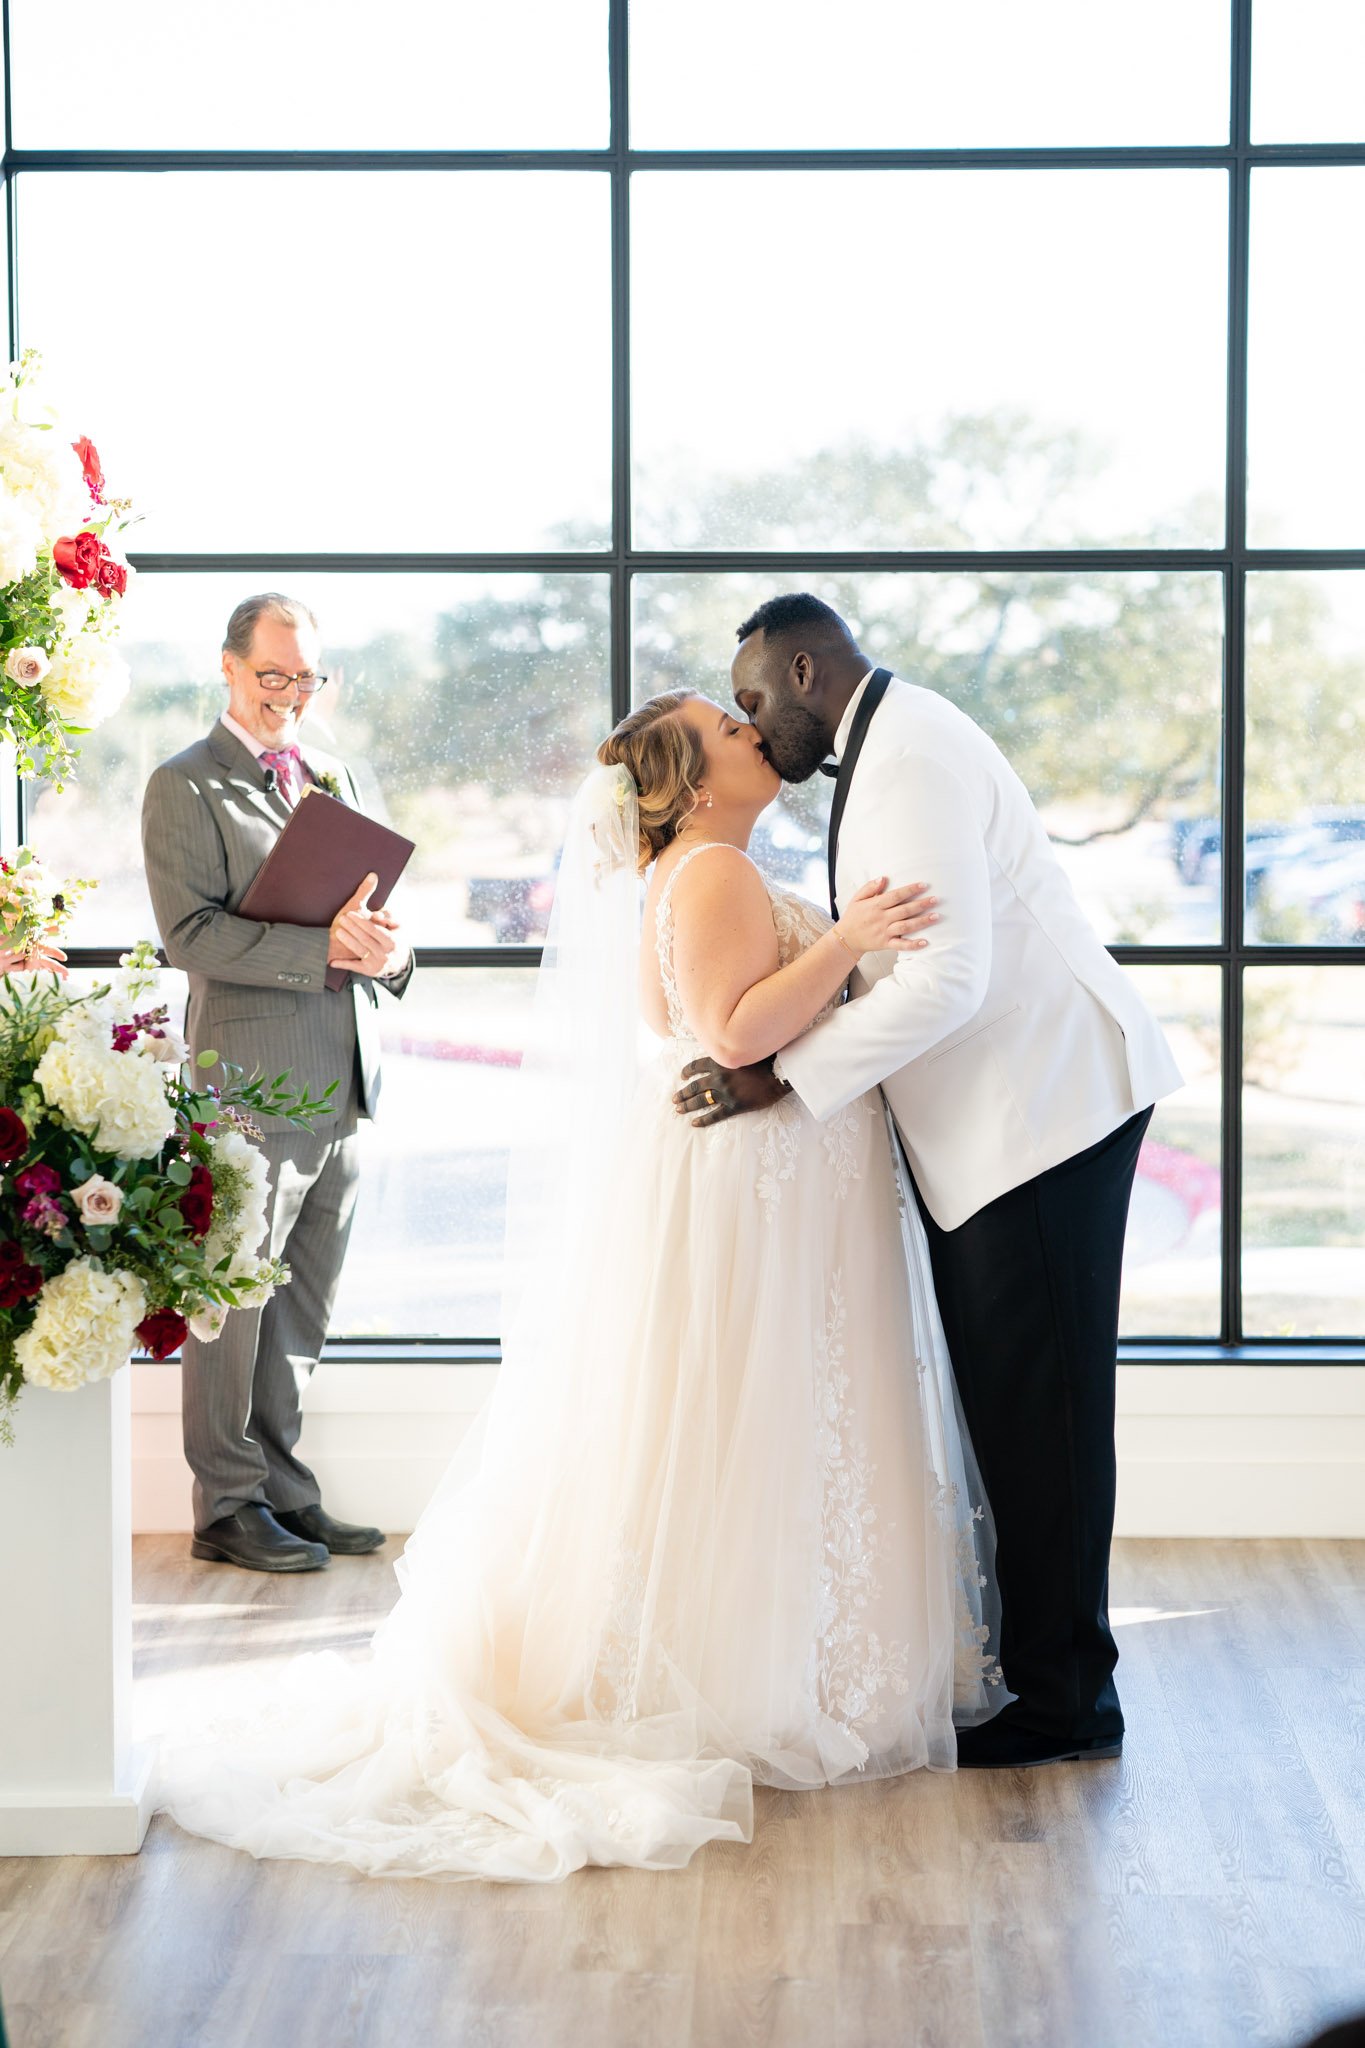 Multiracial newlyweds kiss at the wedding ceremony before a big window at the Arlo TX The Amber Studioa